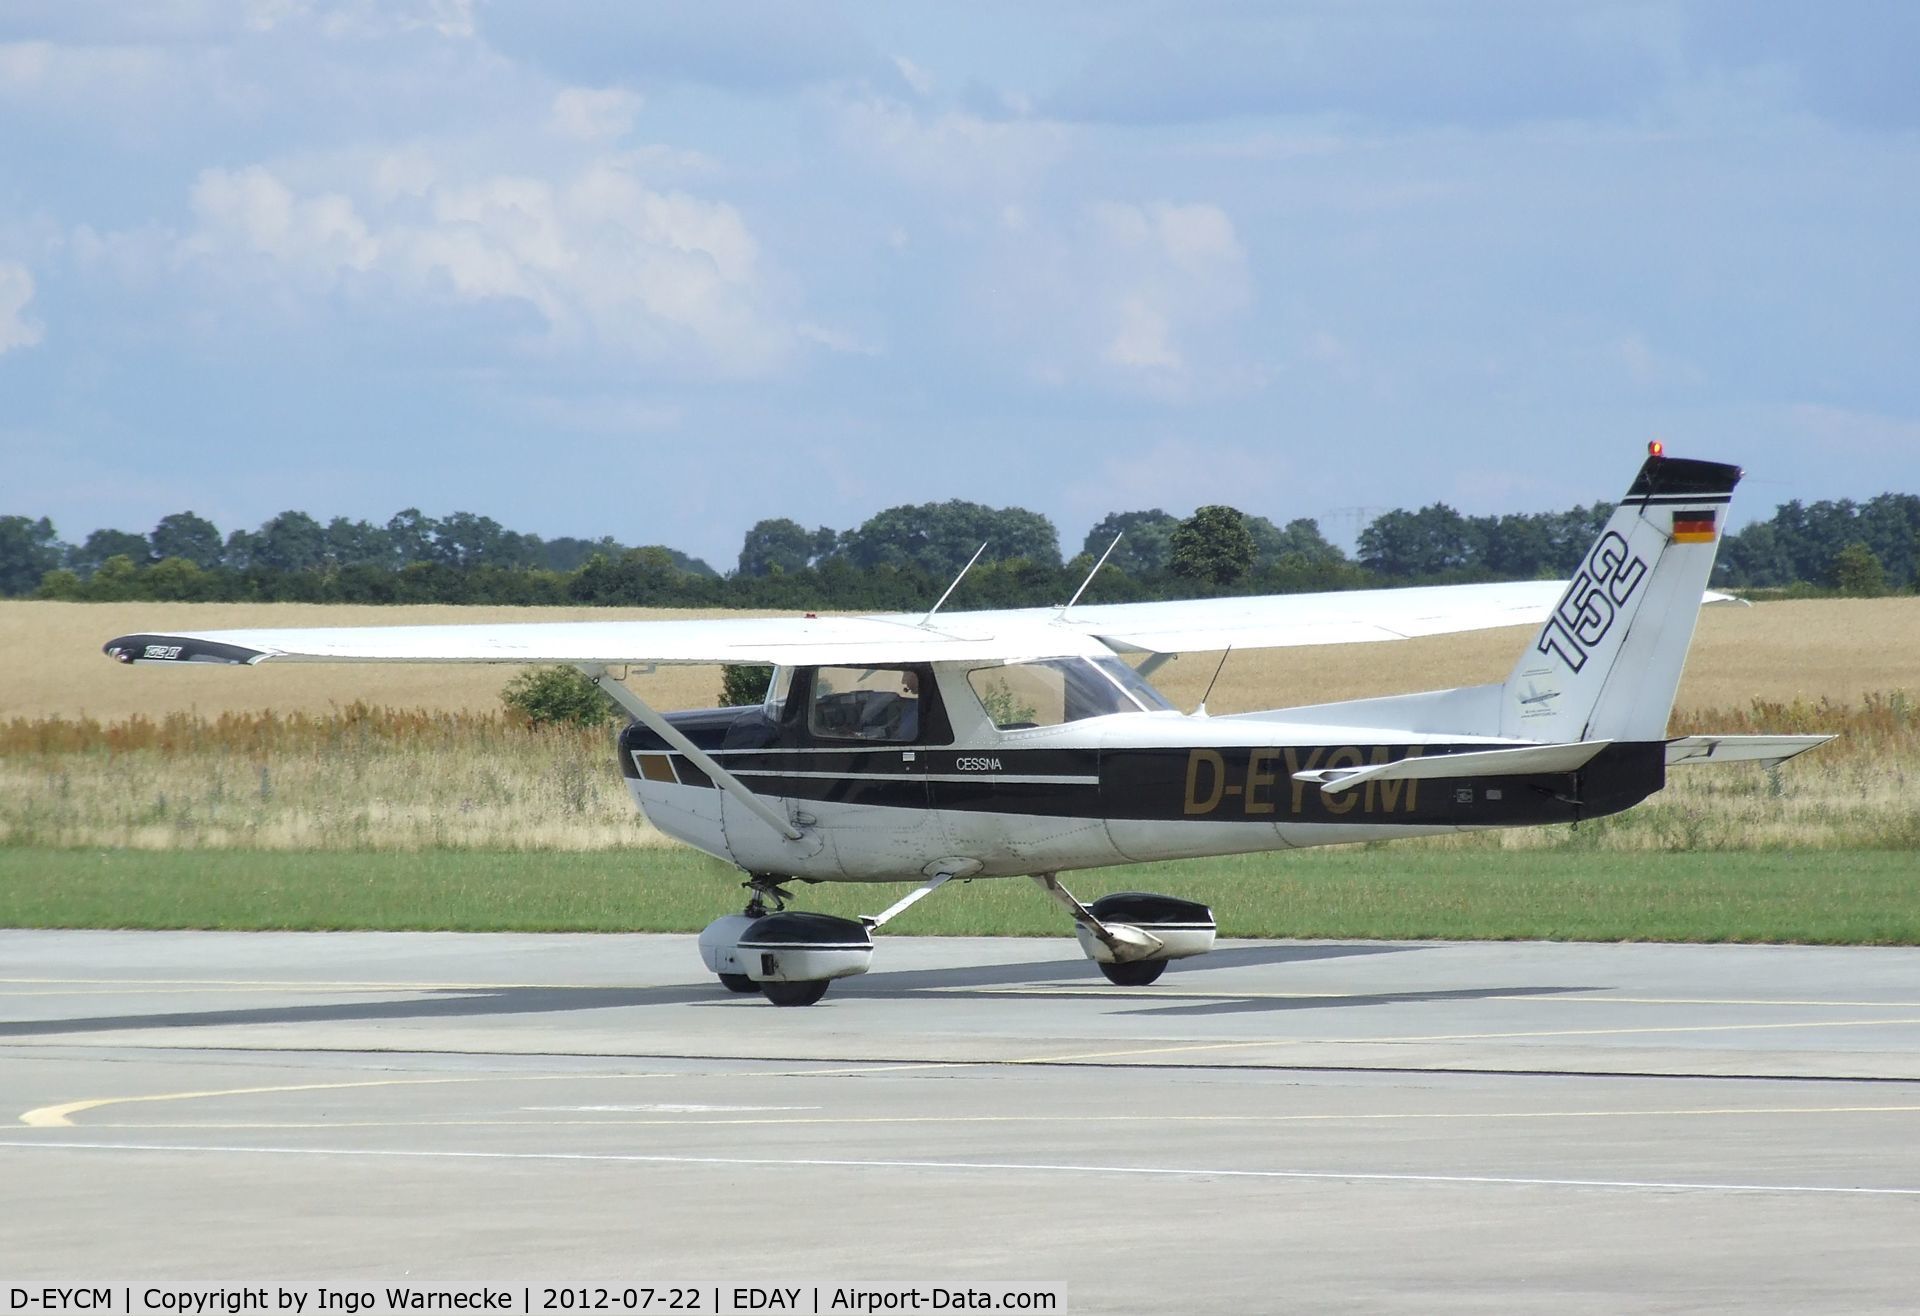 D-EYCM, Cessna 152 C/N 15280506, Cessna 152 at Strausberg airfield